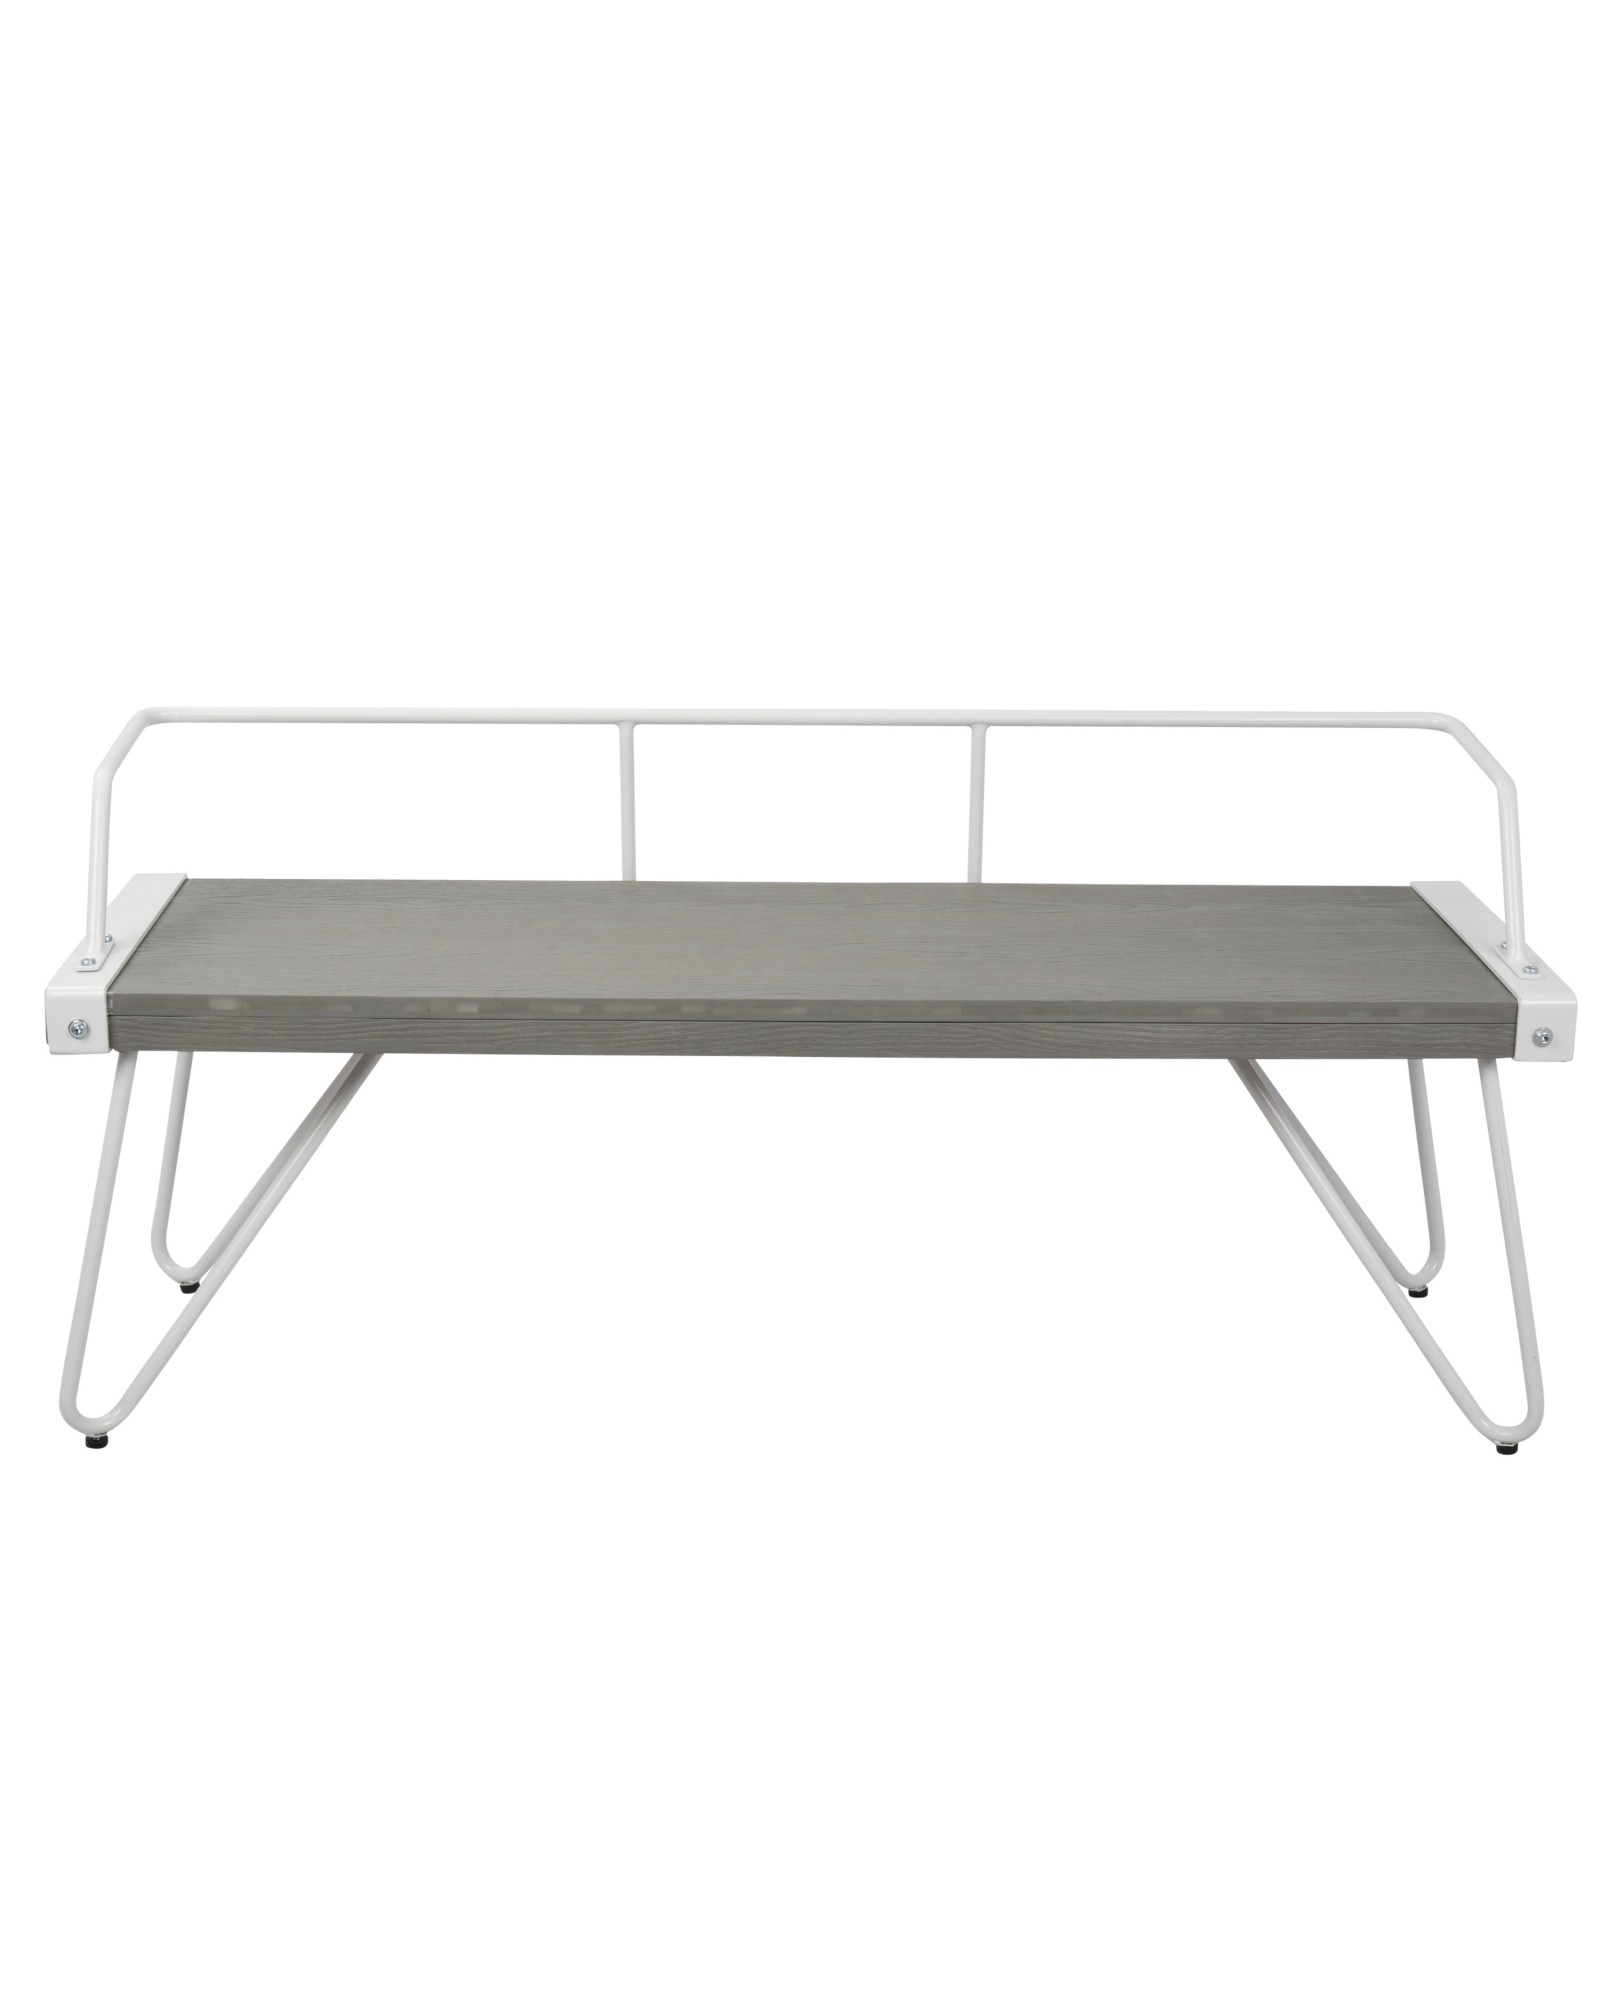 Stefani Industrial Bench in White and Grey